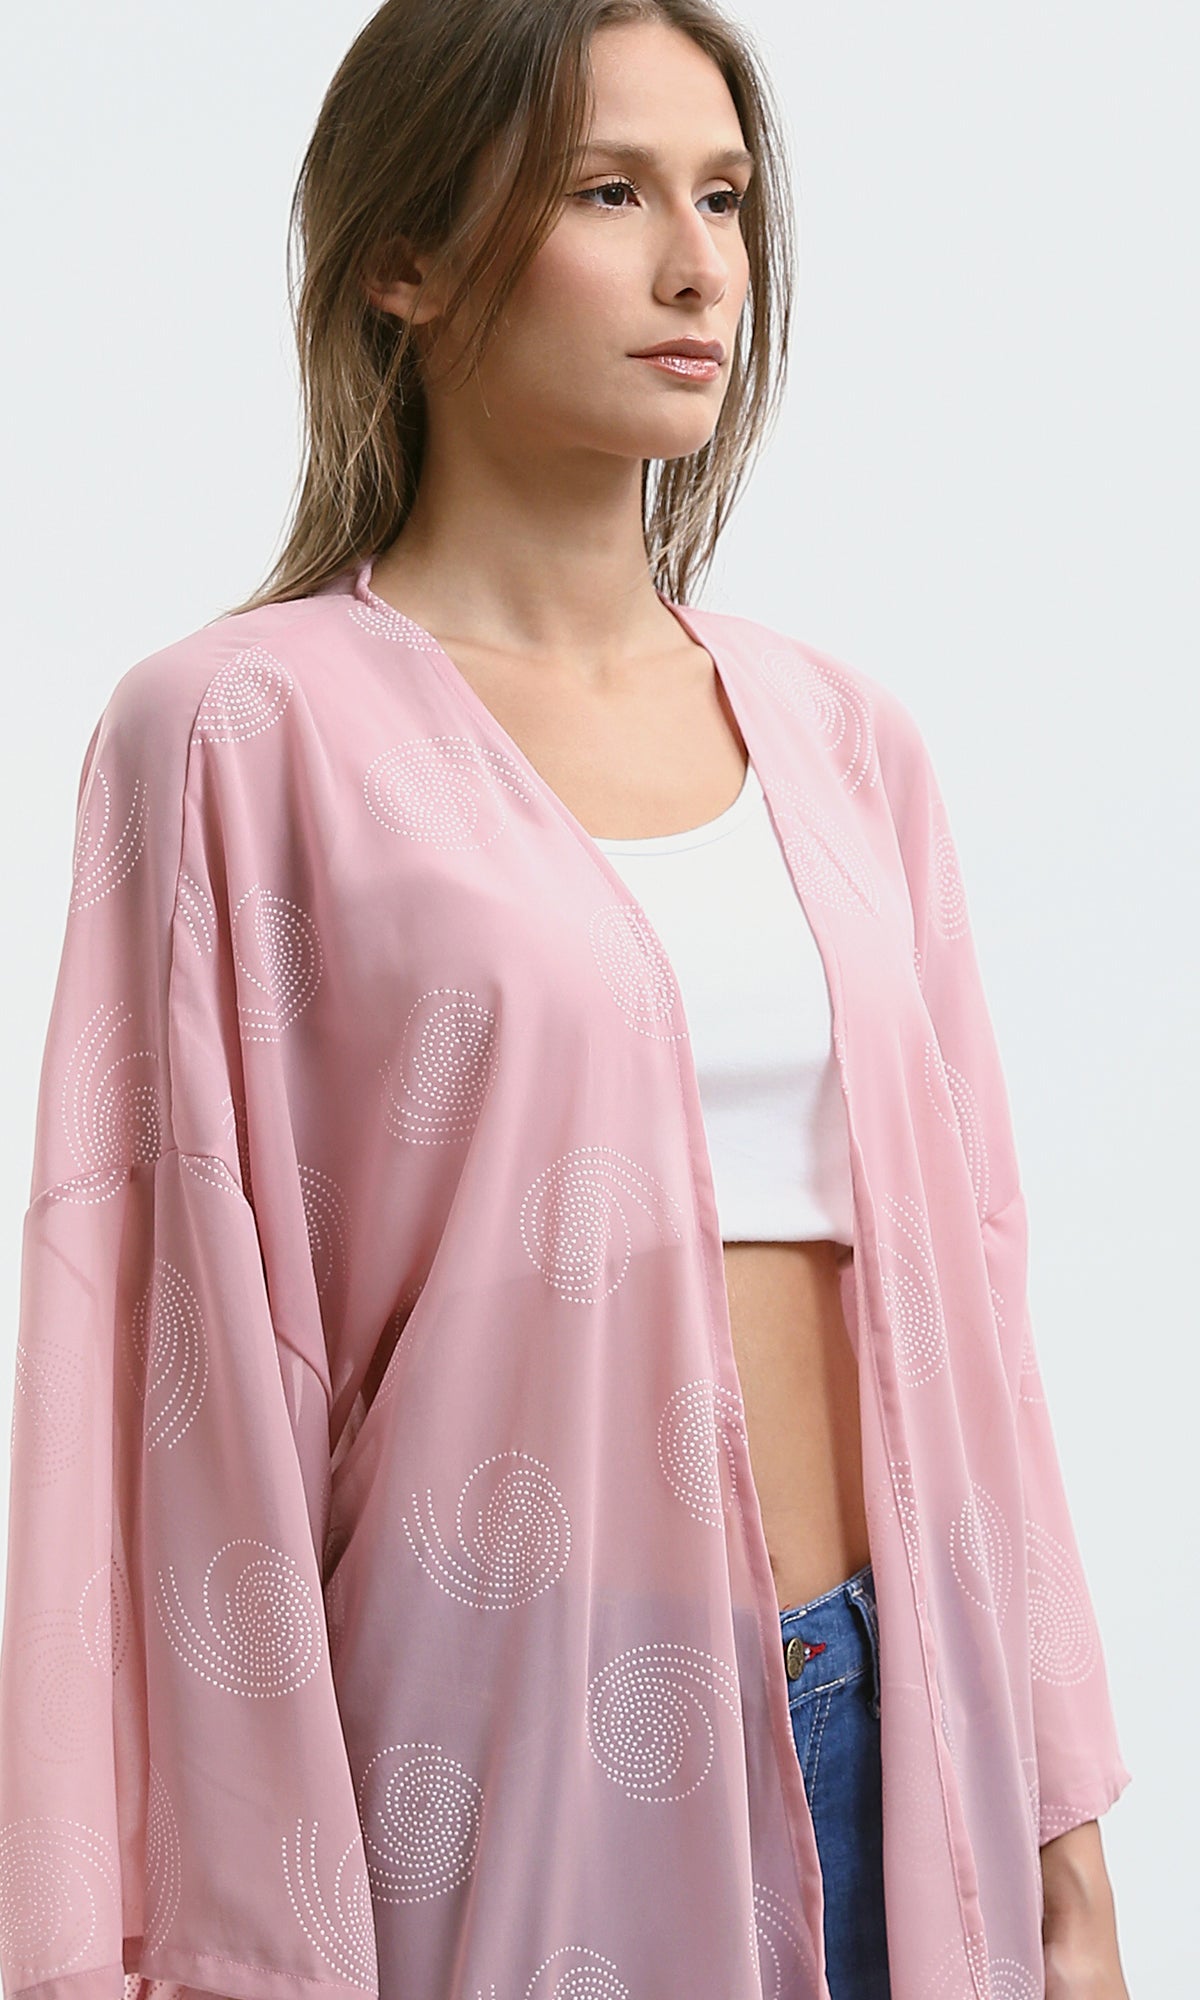 O187206 Fashionable Rose Patterned Cardigan With Open Neckline